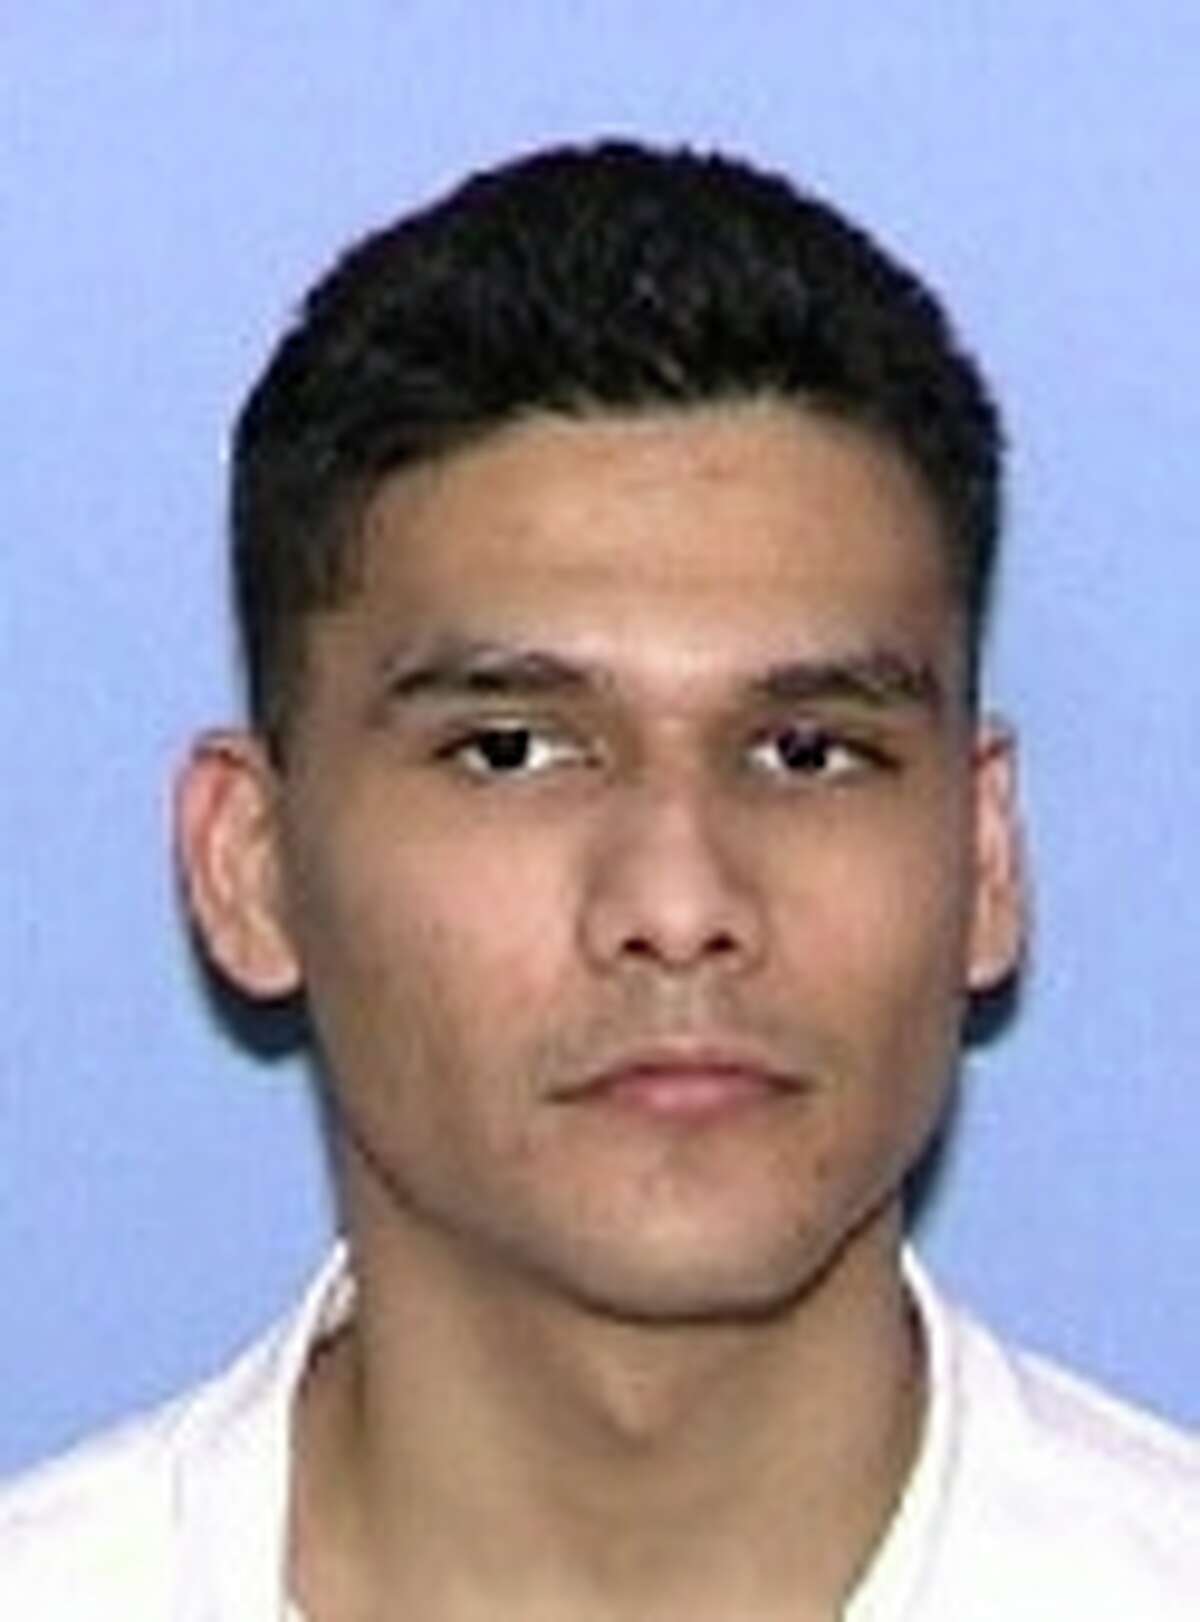 Manuel Garza Jr., shown in 2013, was convicted of capital murder in less than an hour.